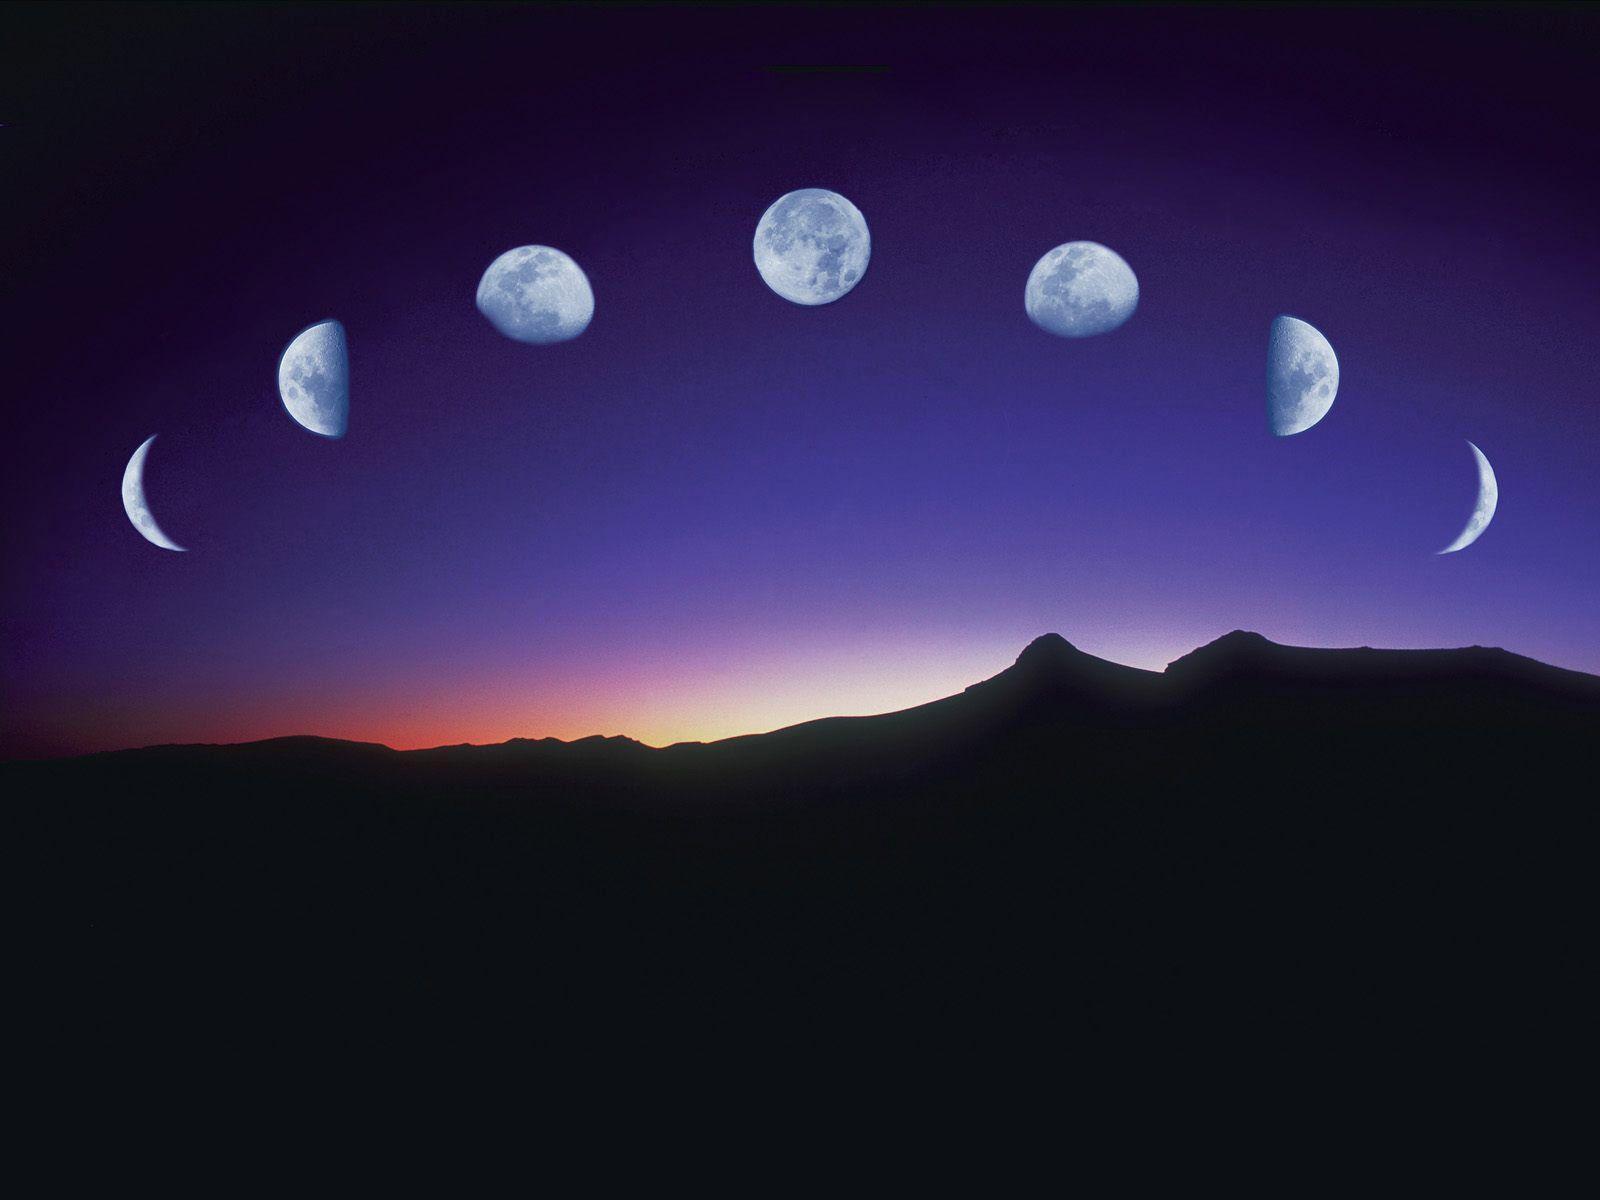 Desktop Wallpaper · Gallery · Space · Phases of the Moon. Free